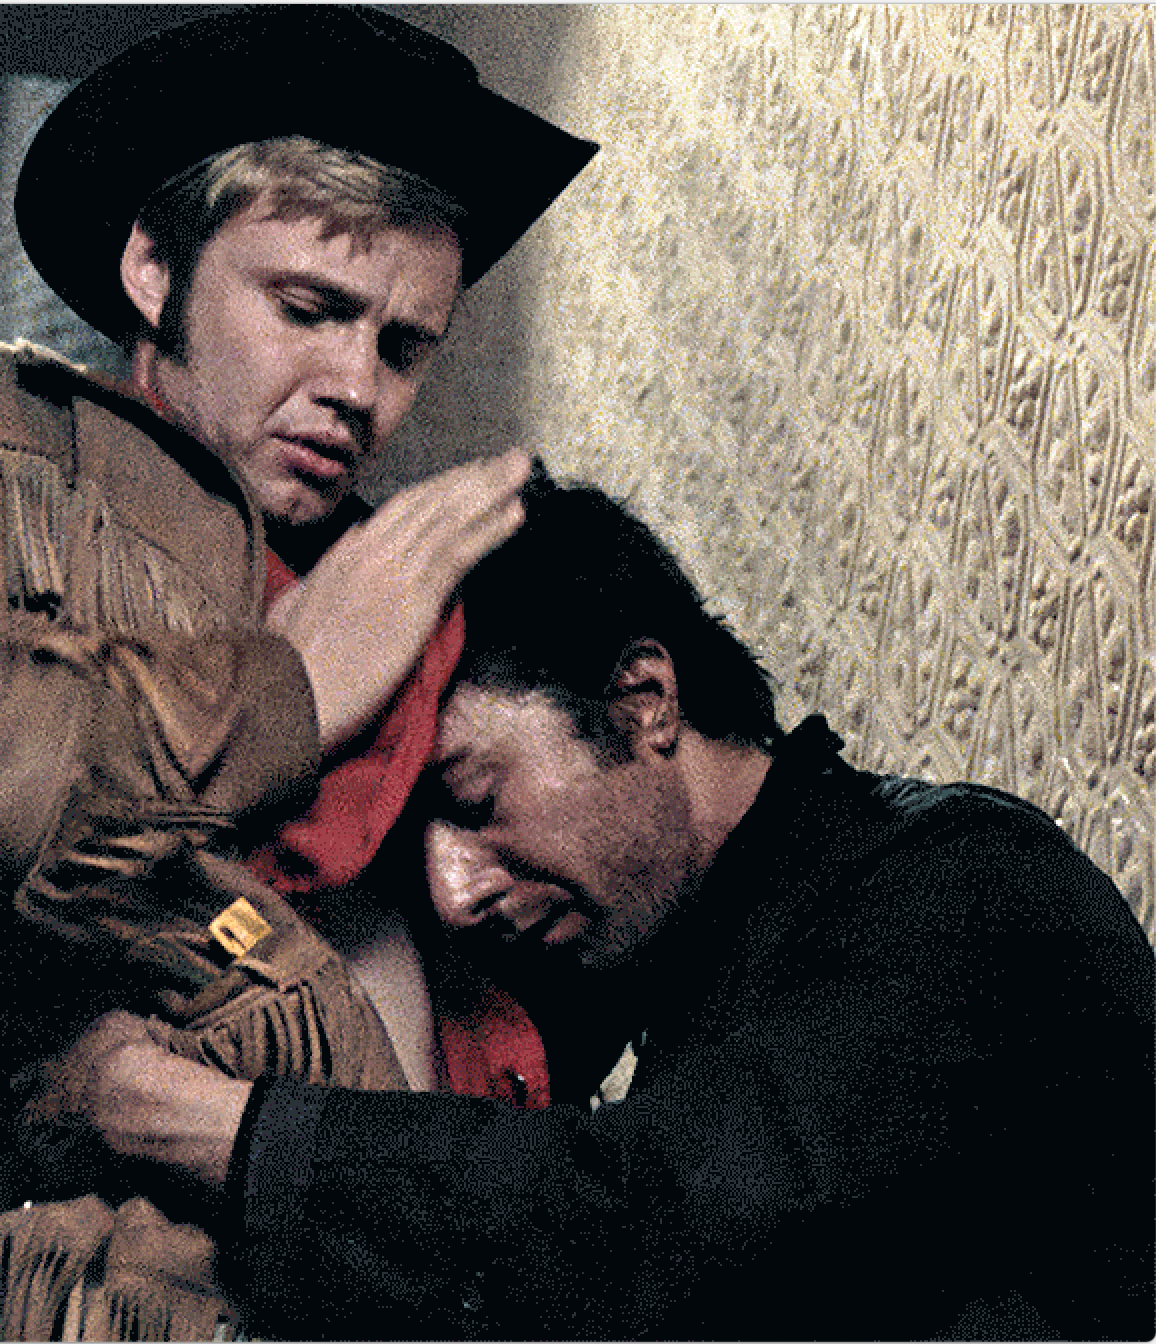 Midnight Cowboy Gave Us a New Kind of Love - The Gay & Lesbian Review